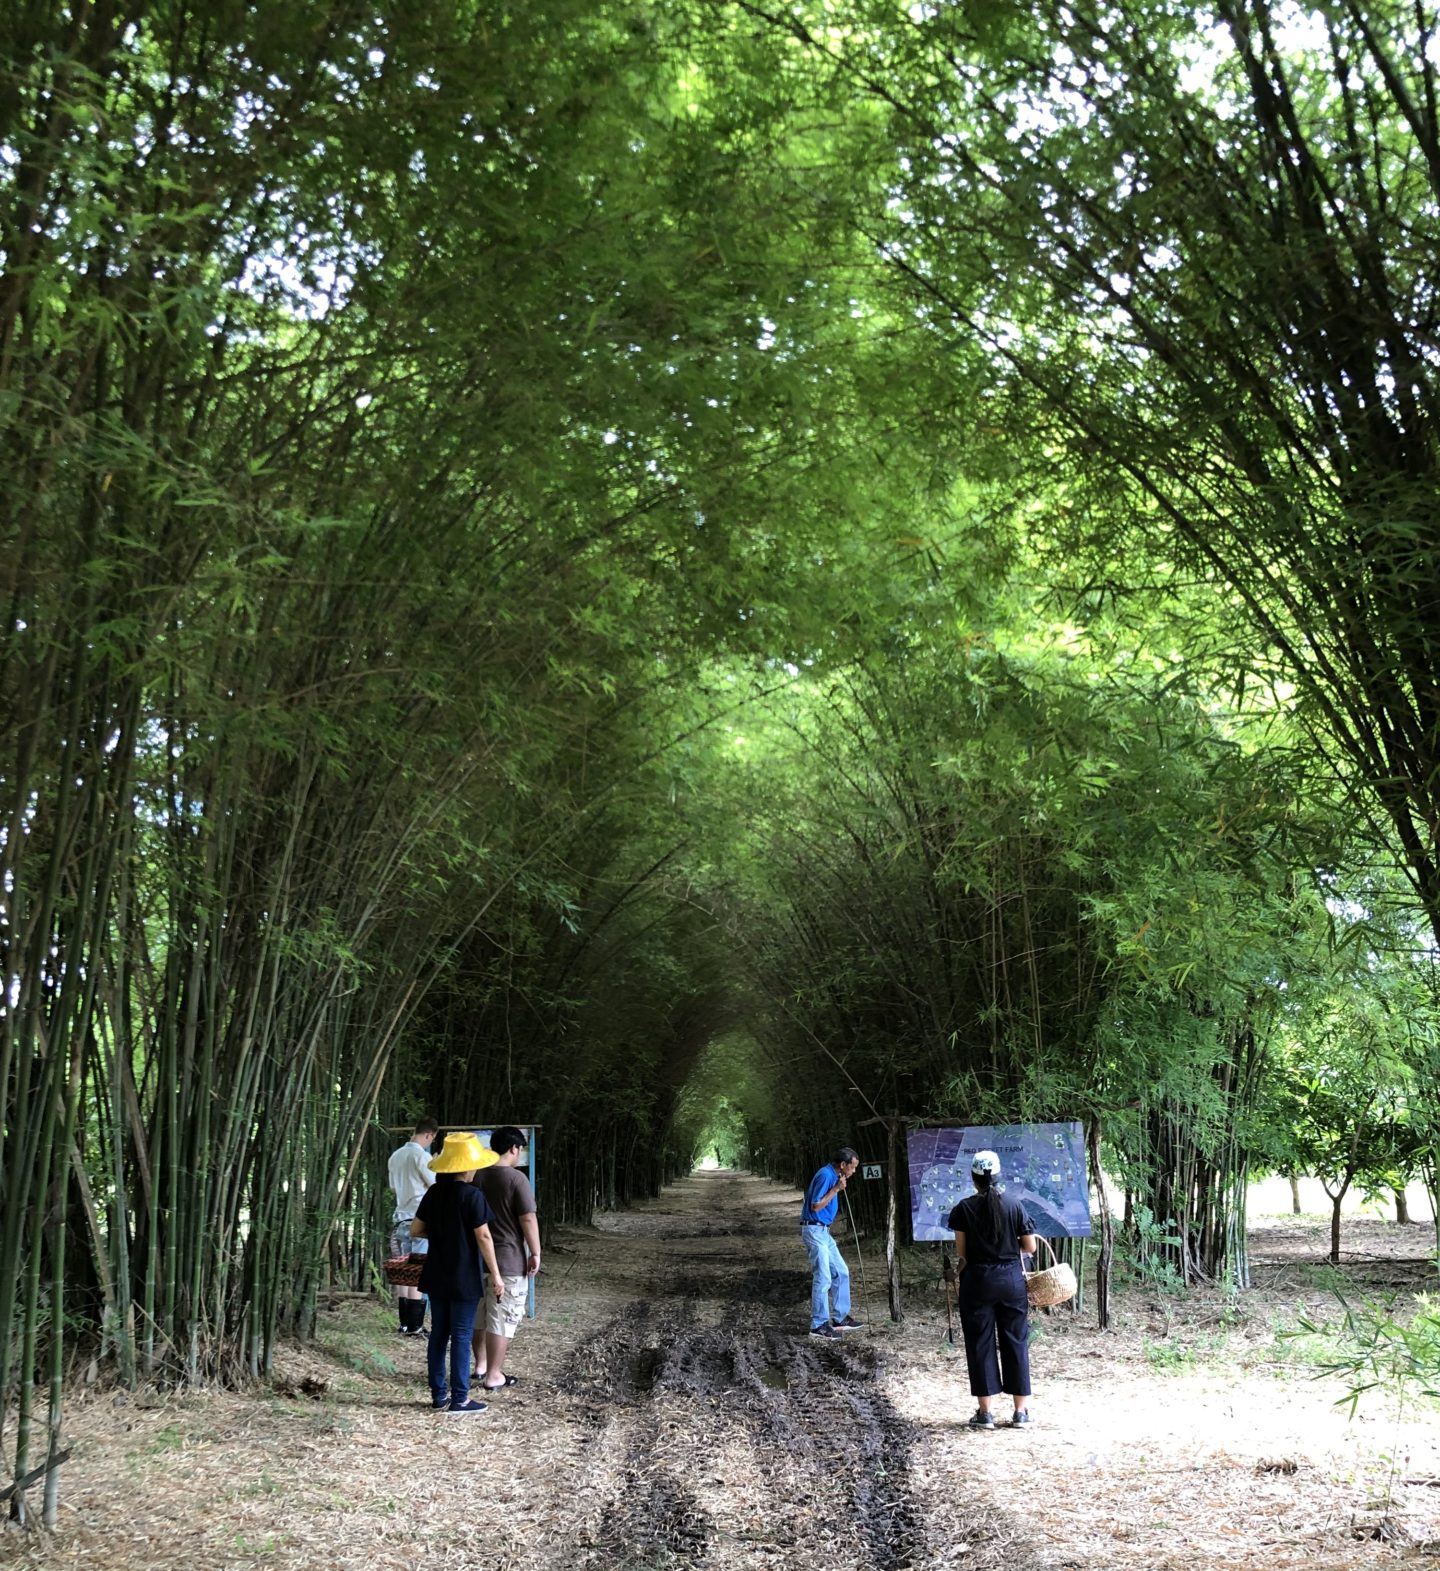 Red Rocket Farm - bamboo tunnel, a gastronomic experience beyond Bangkok